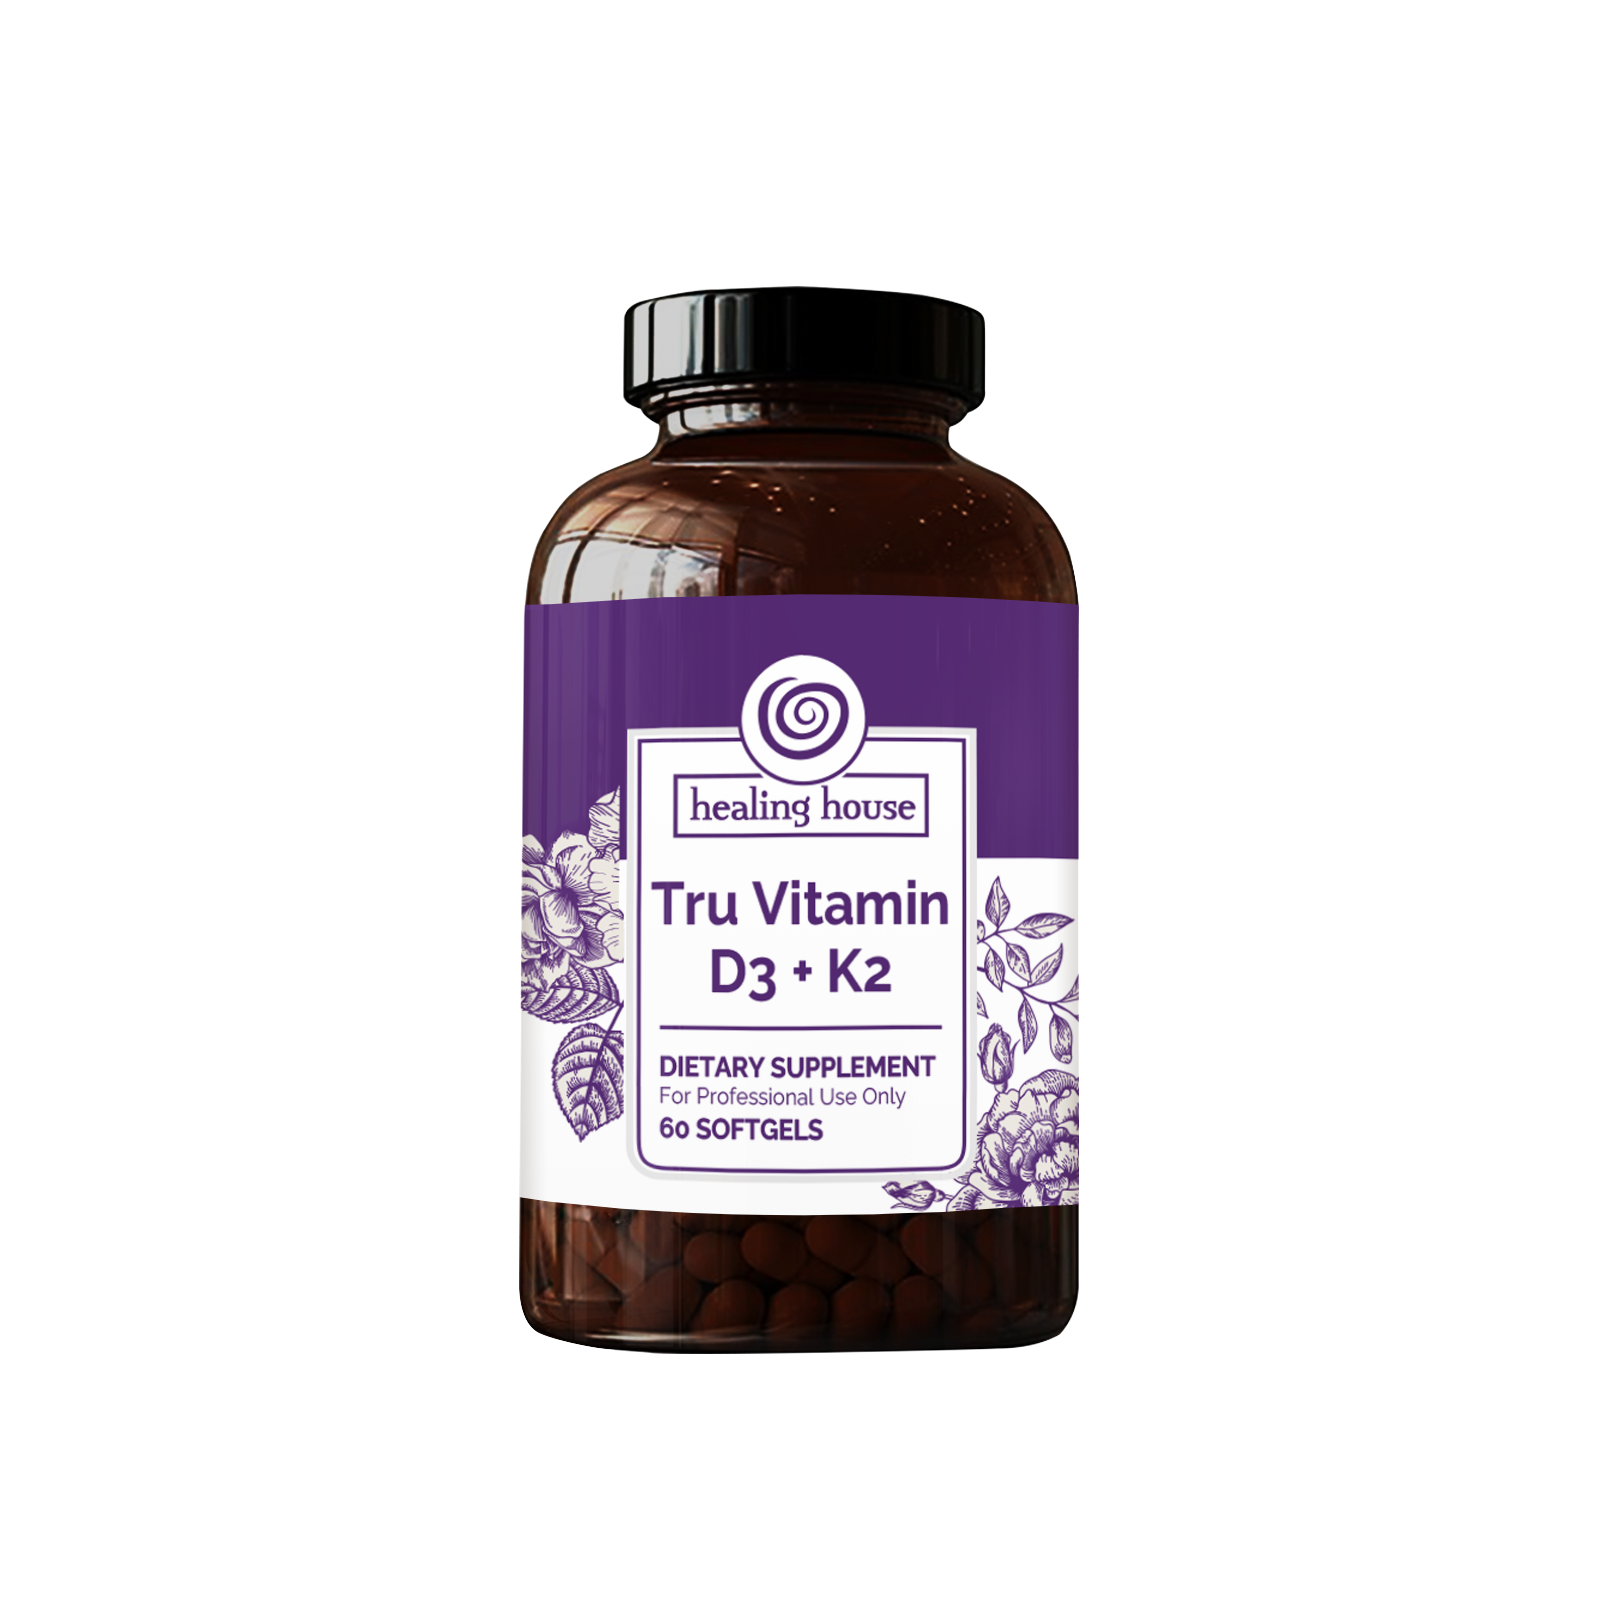 Tru Vitamin D3+K2 product container front